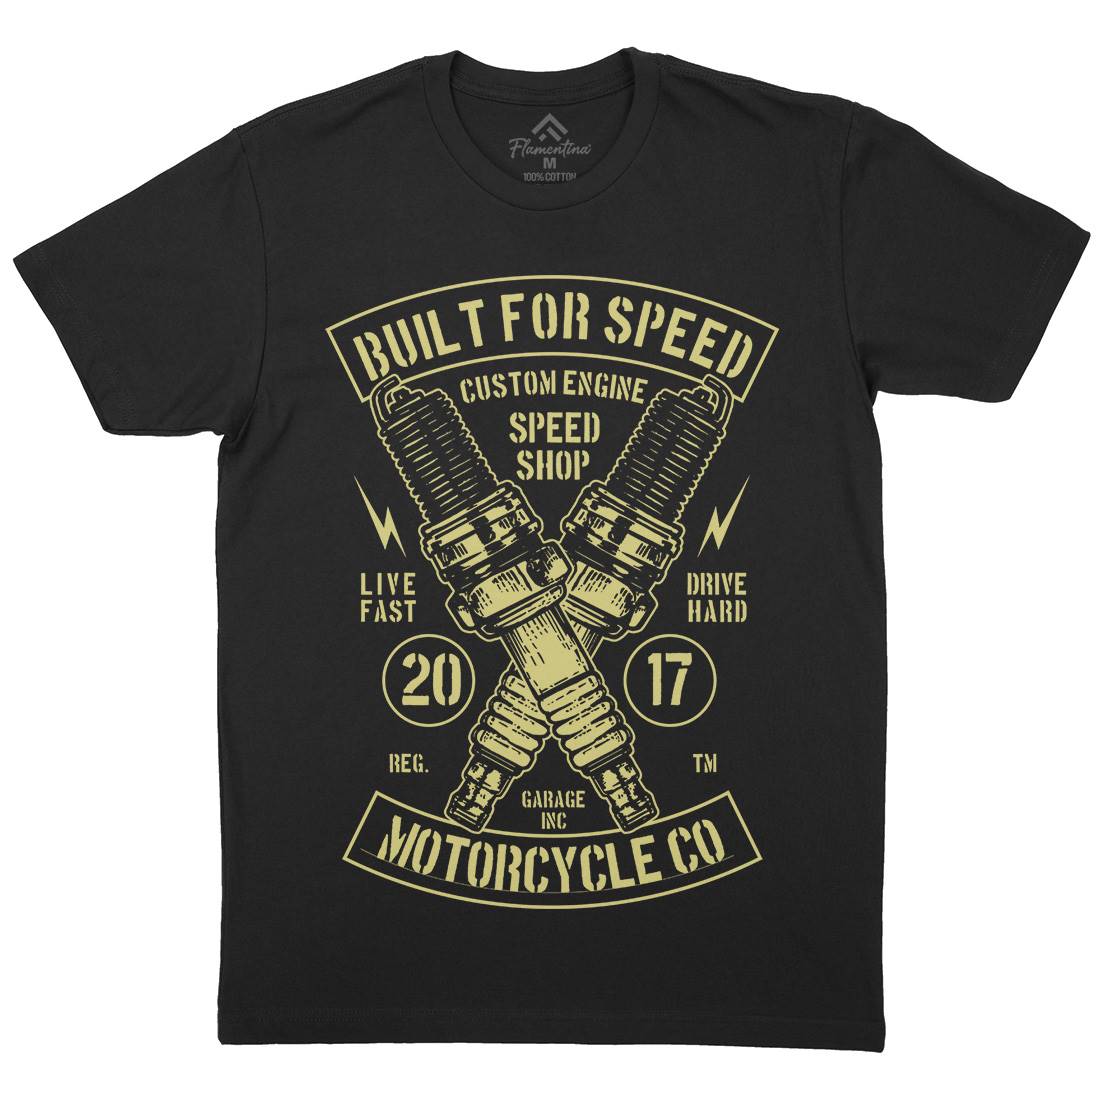 Built For Speed Mens Crew Neck T-Shirt Motorcycles B188